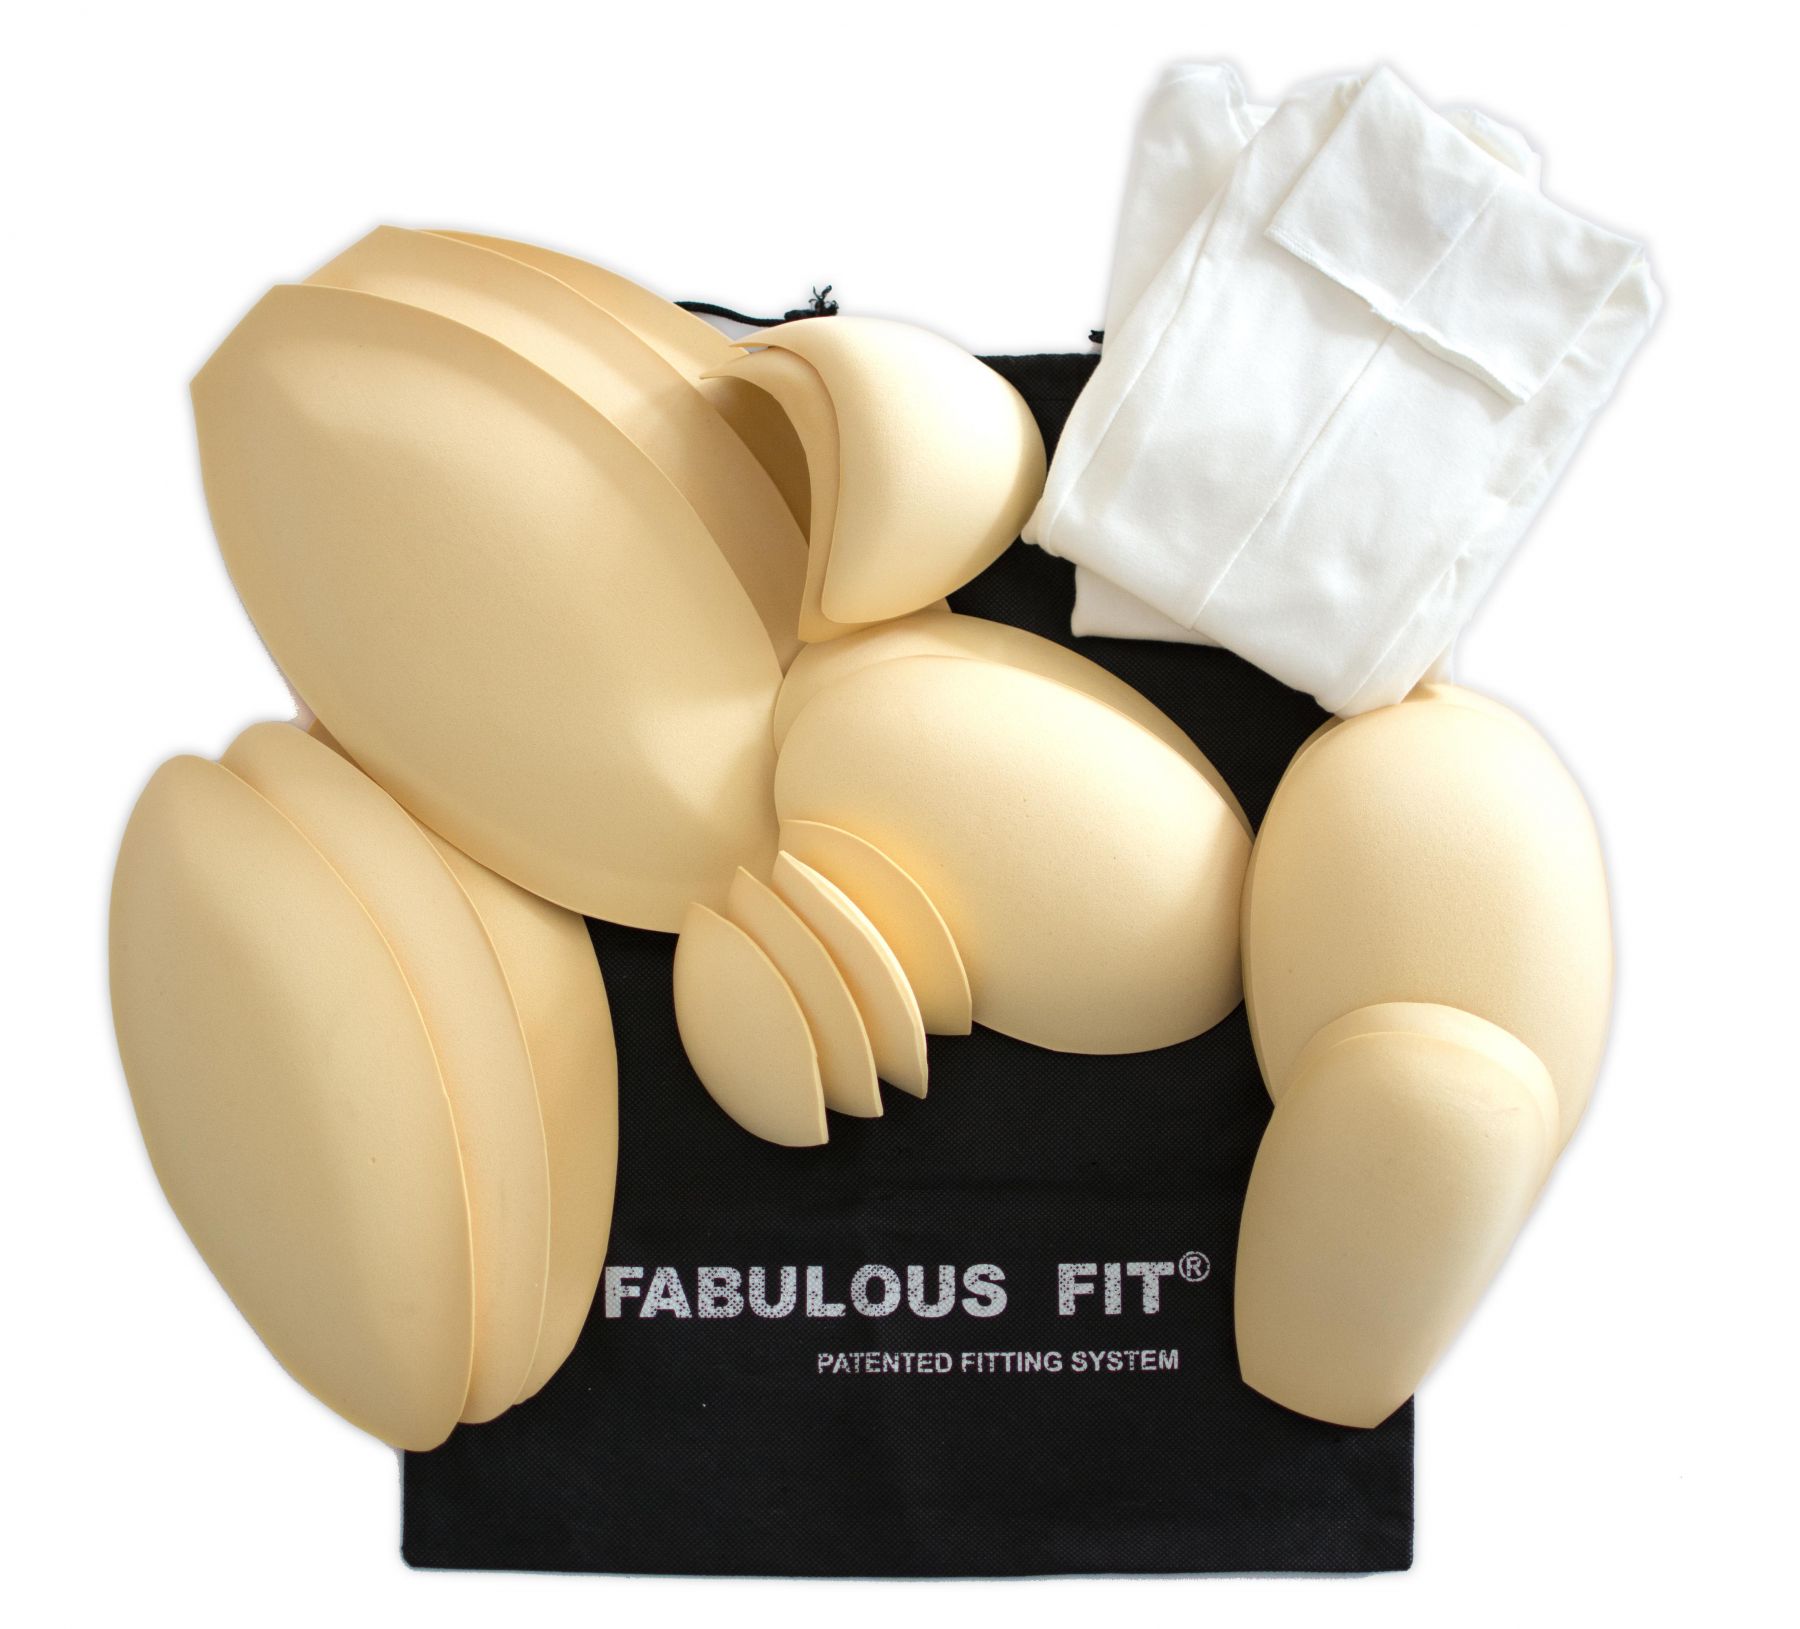 The Ultimate Dress Form Fitting Pad System by Fabulous Fit